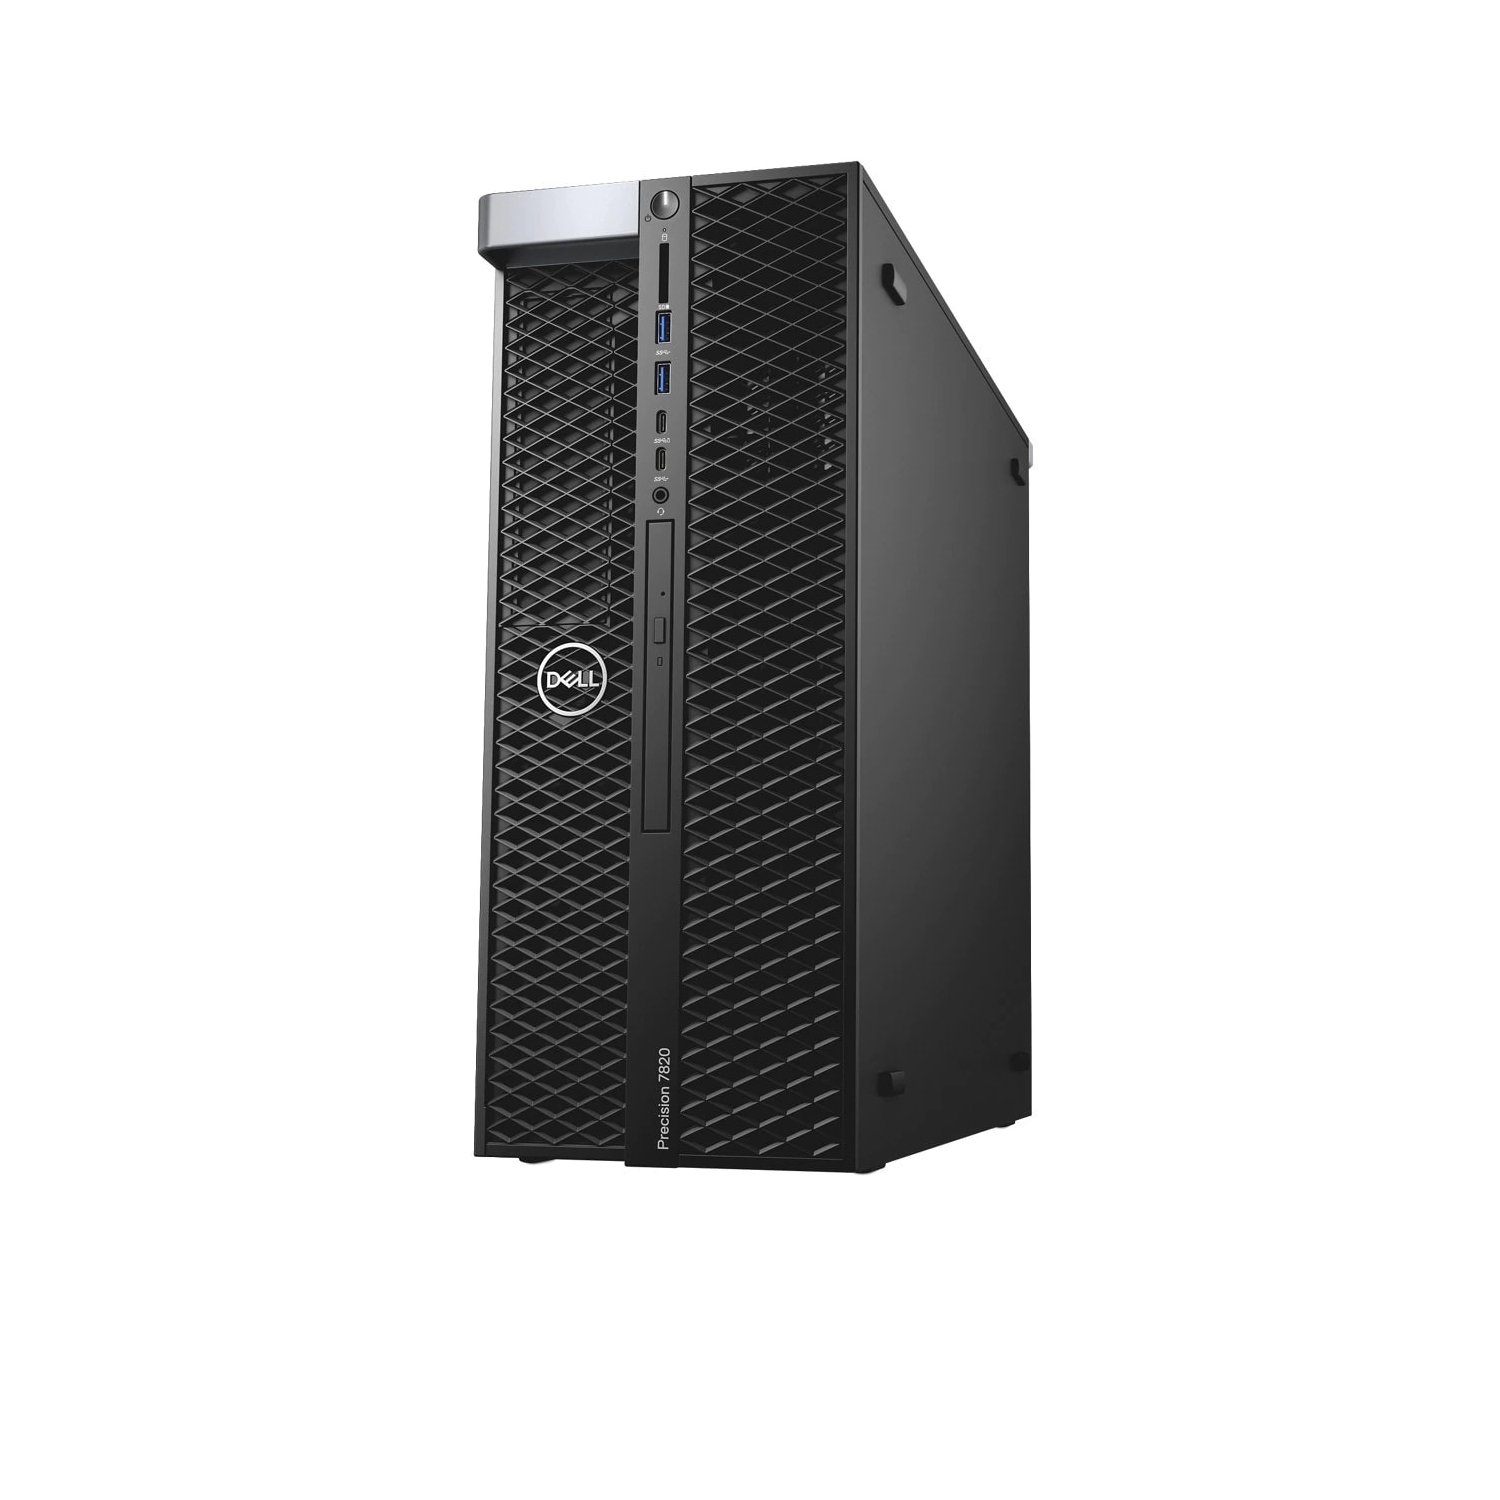 Refurbished (Excellent) - Dell Precision T7820 Workstation Desktop (2018), Core Xeon Silver, 4TB HDD + 256GB SSD, 64GB RAM, RTX 5000, 10 Cores @ 3.2 GHz Certified